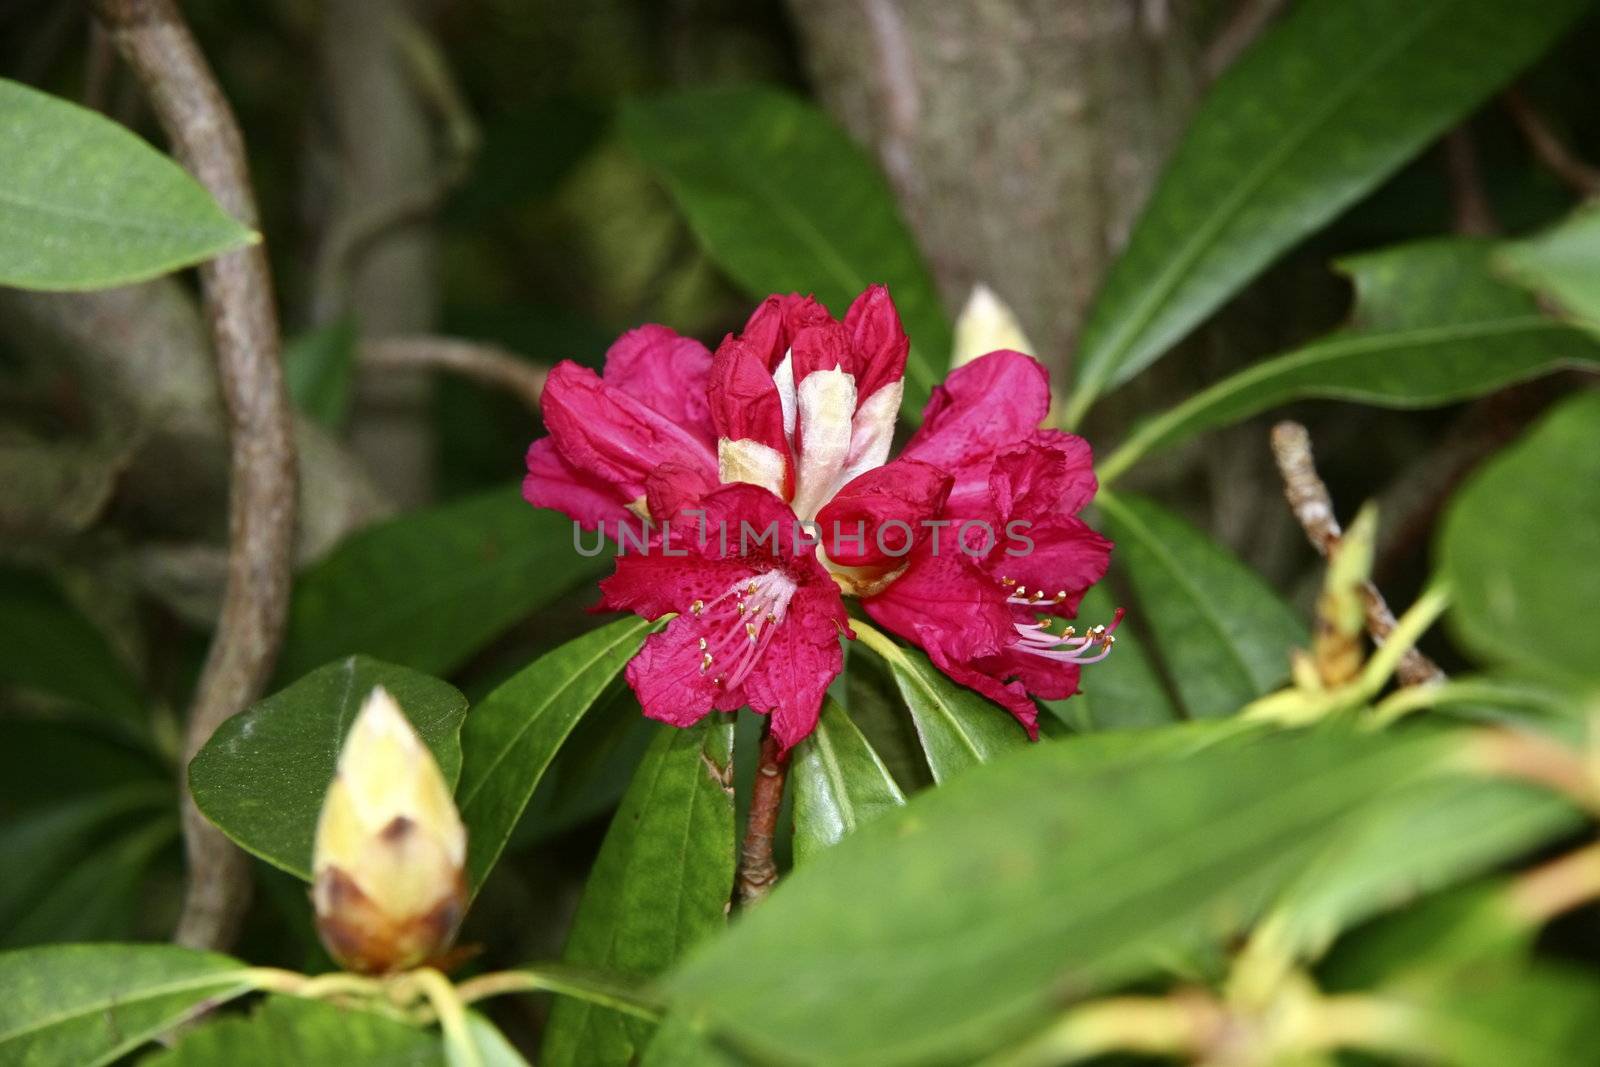 bright red rhododendron flower on the shrub